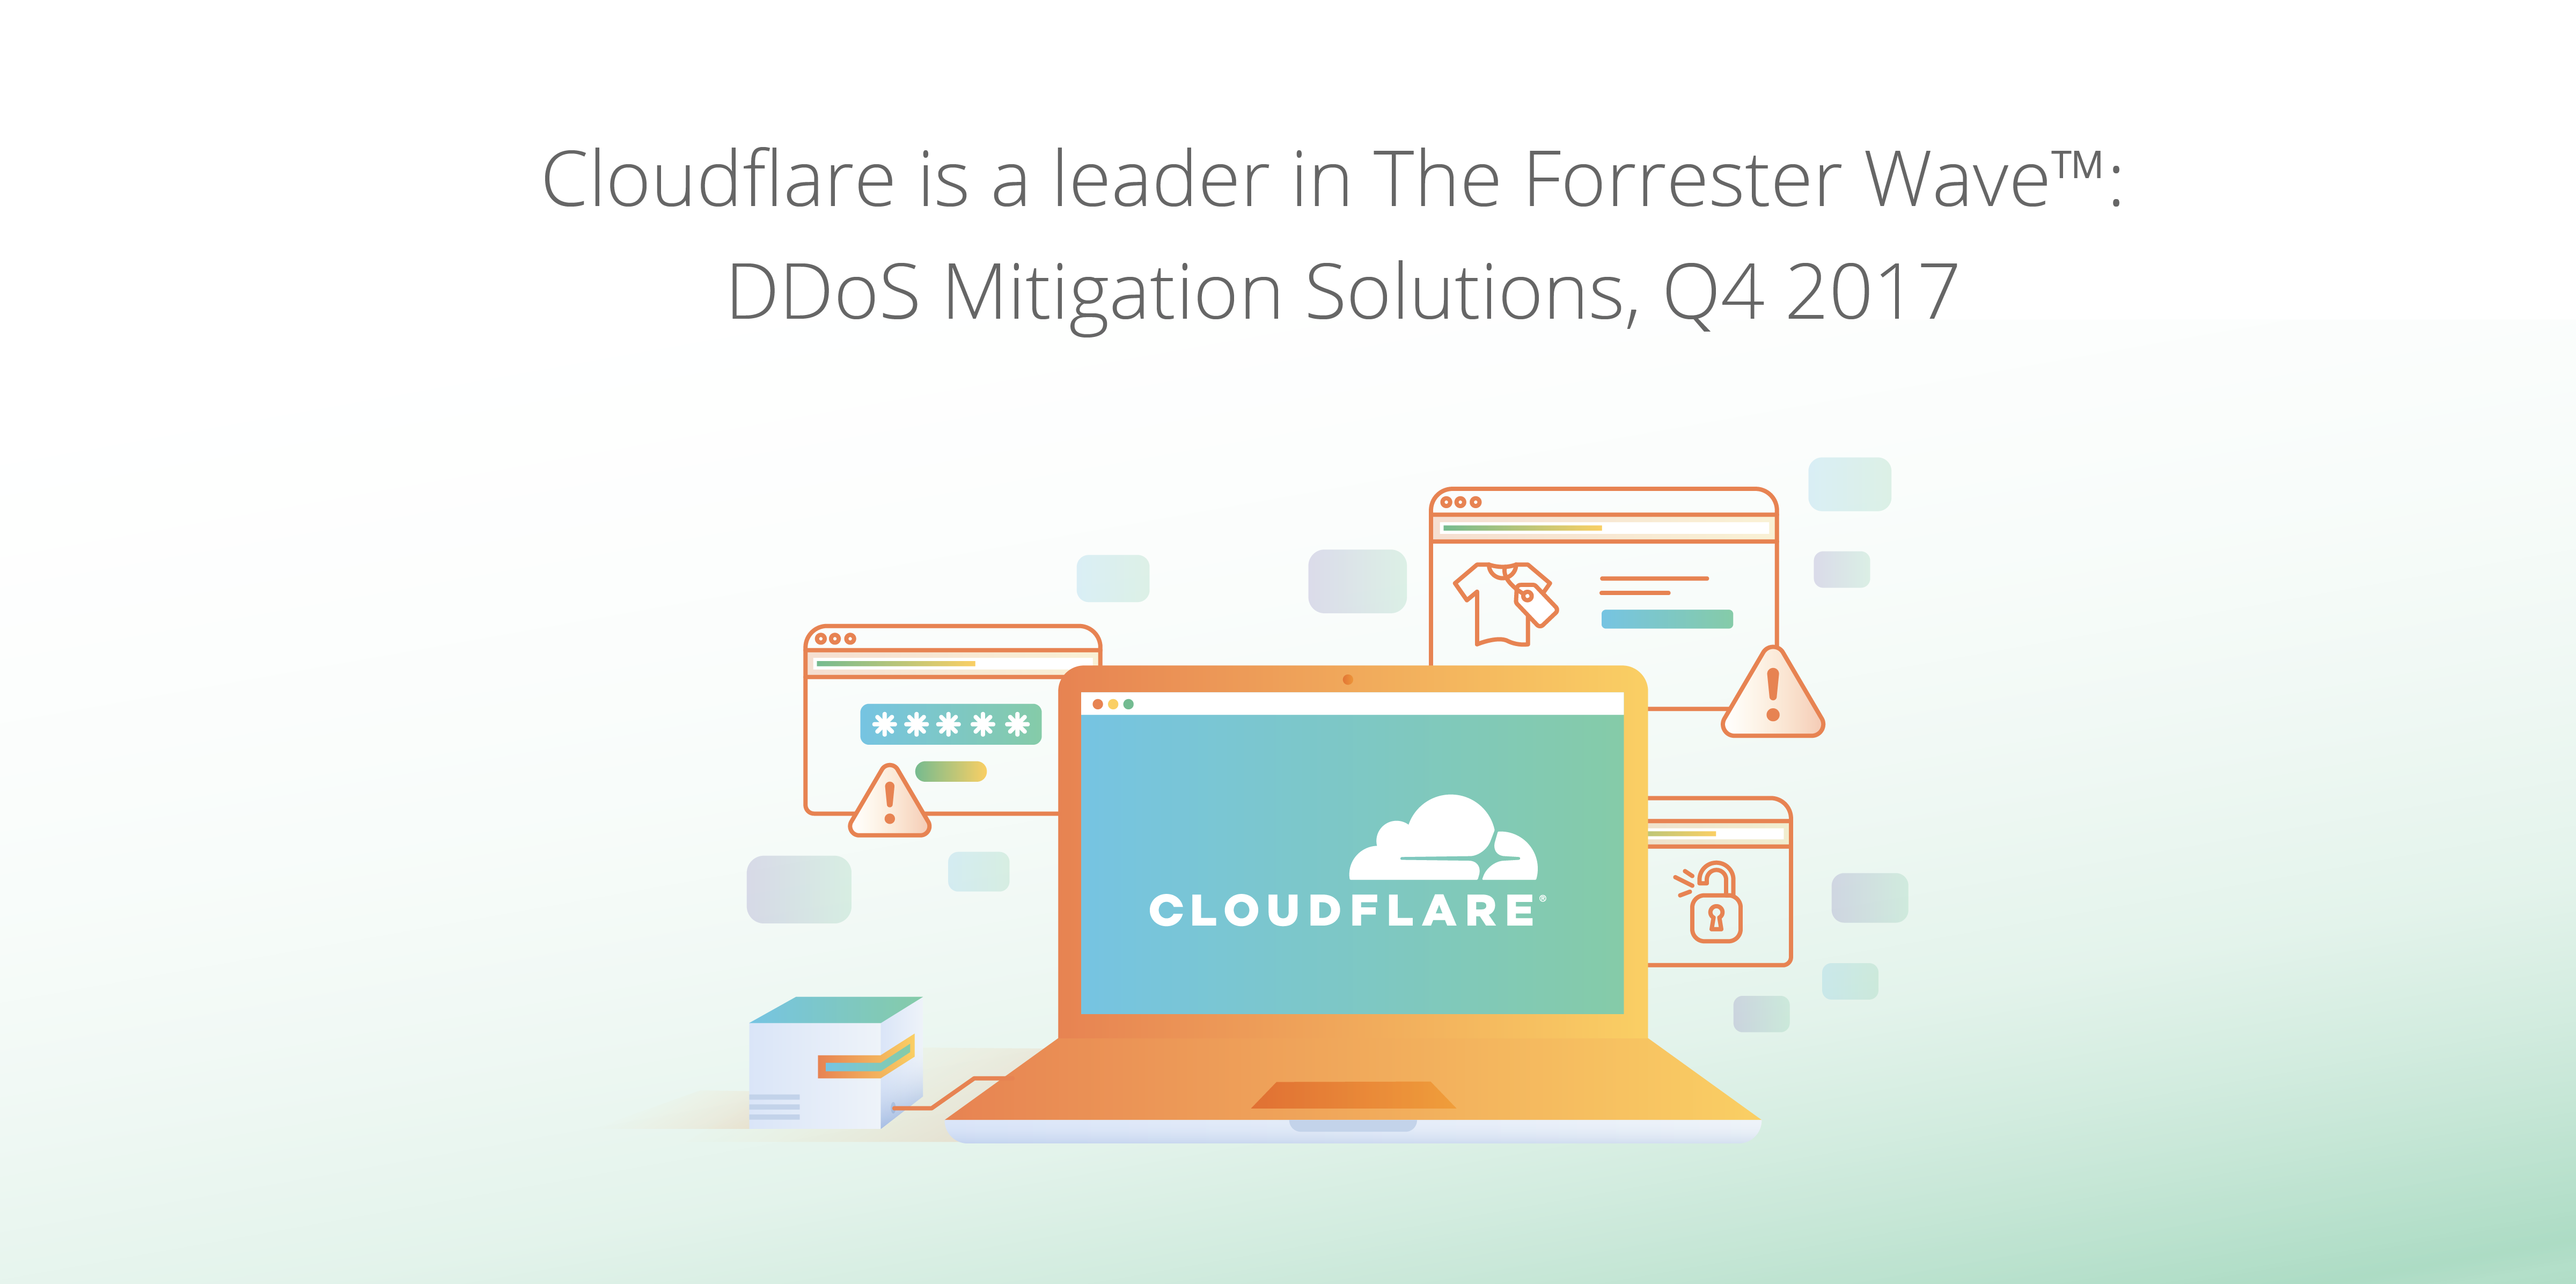 On the Leading Edge - Cloudflare named a leader in The Forrester Wave: DDoS Mitigation Solutions